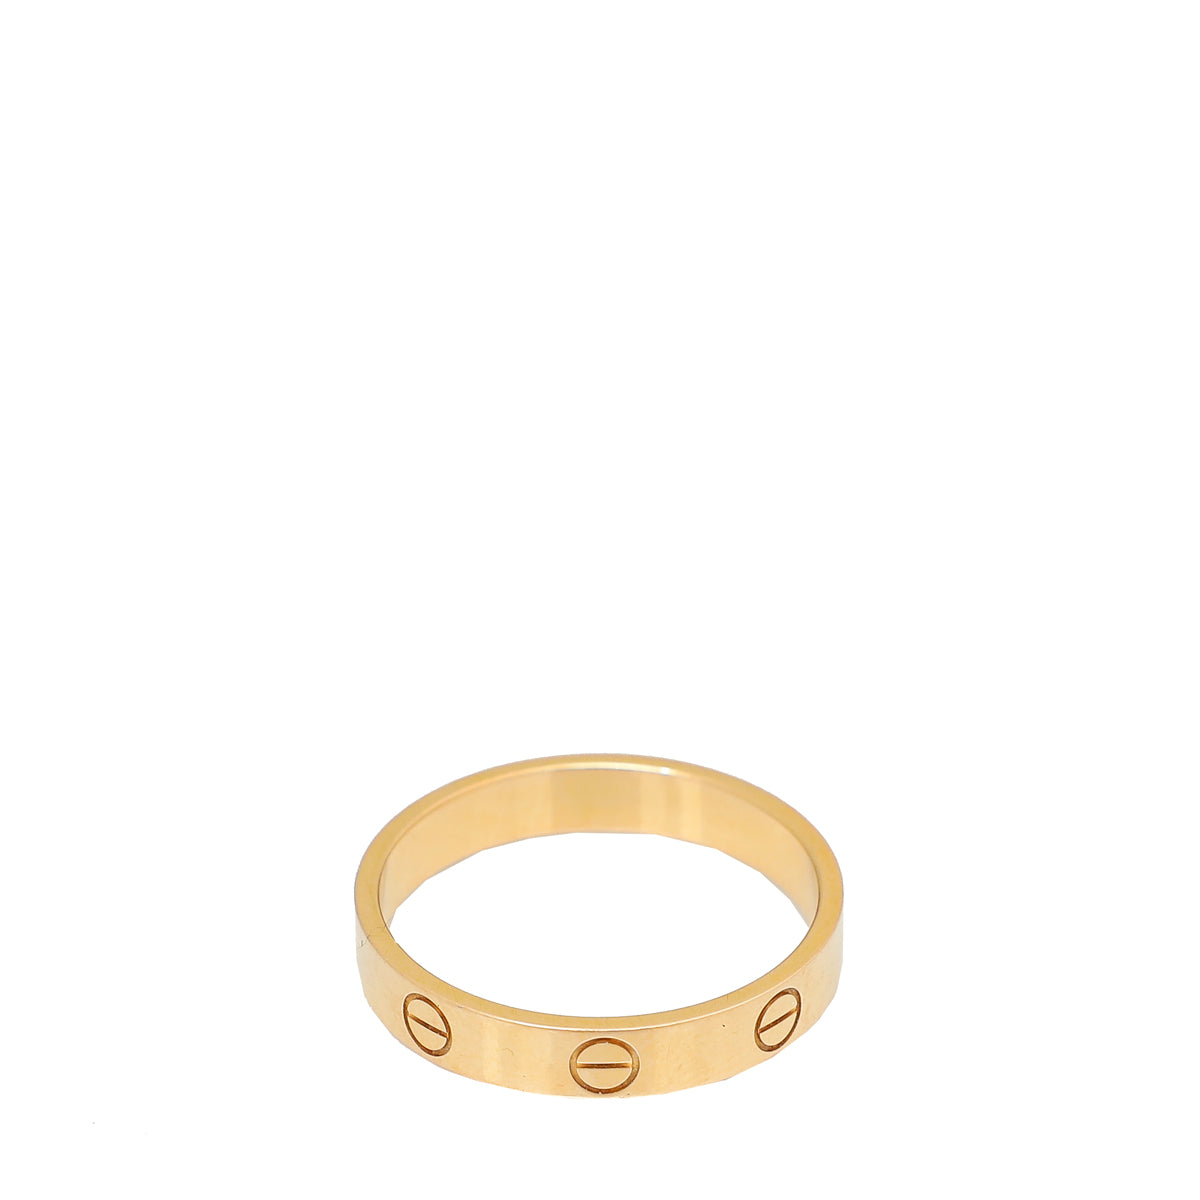 Cartier rings | Cartier love ring, Cartier nail ring, Dream jewelry